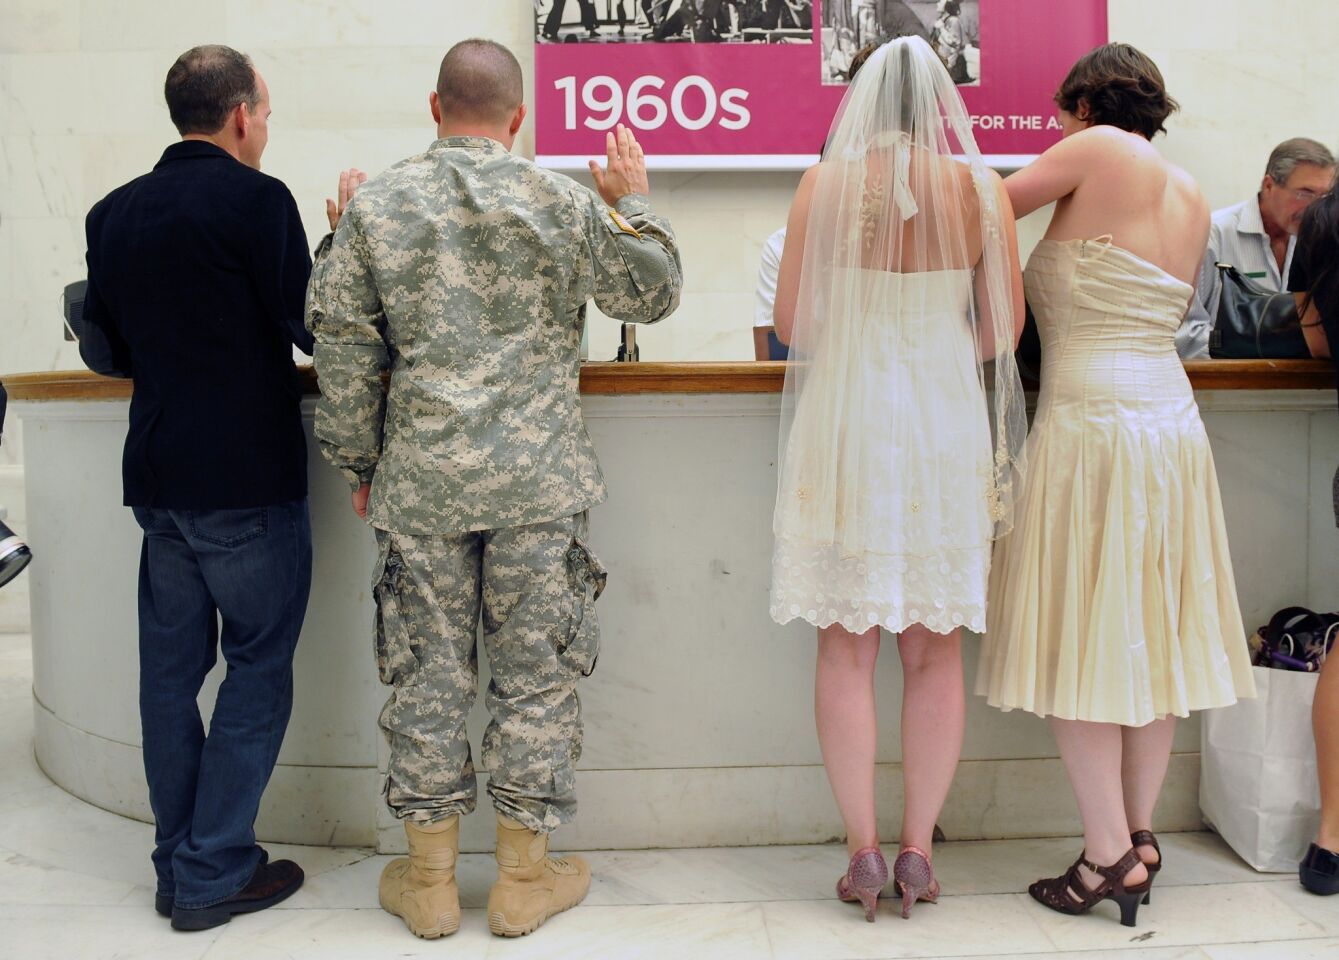 Army Sgt. Michael Potoczniak and Todd Saunders, left; and Cynthia Wides, in the veil, and Elizabeth Carey wait to get married at City Hall in San Francisco on Saturday